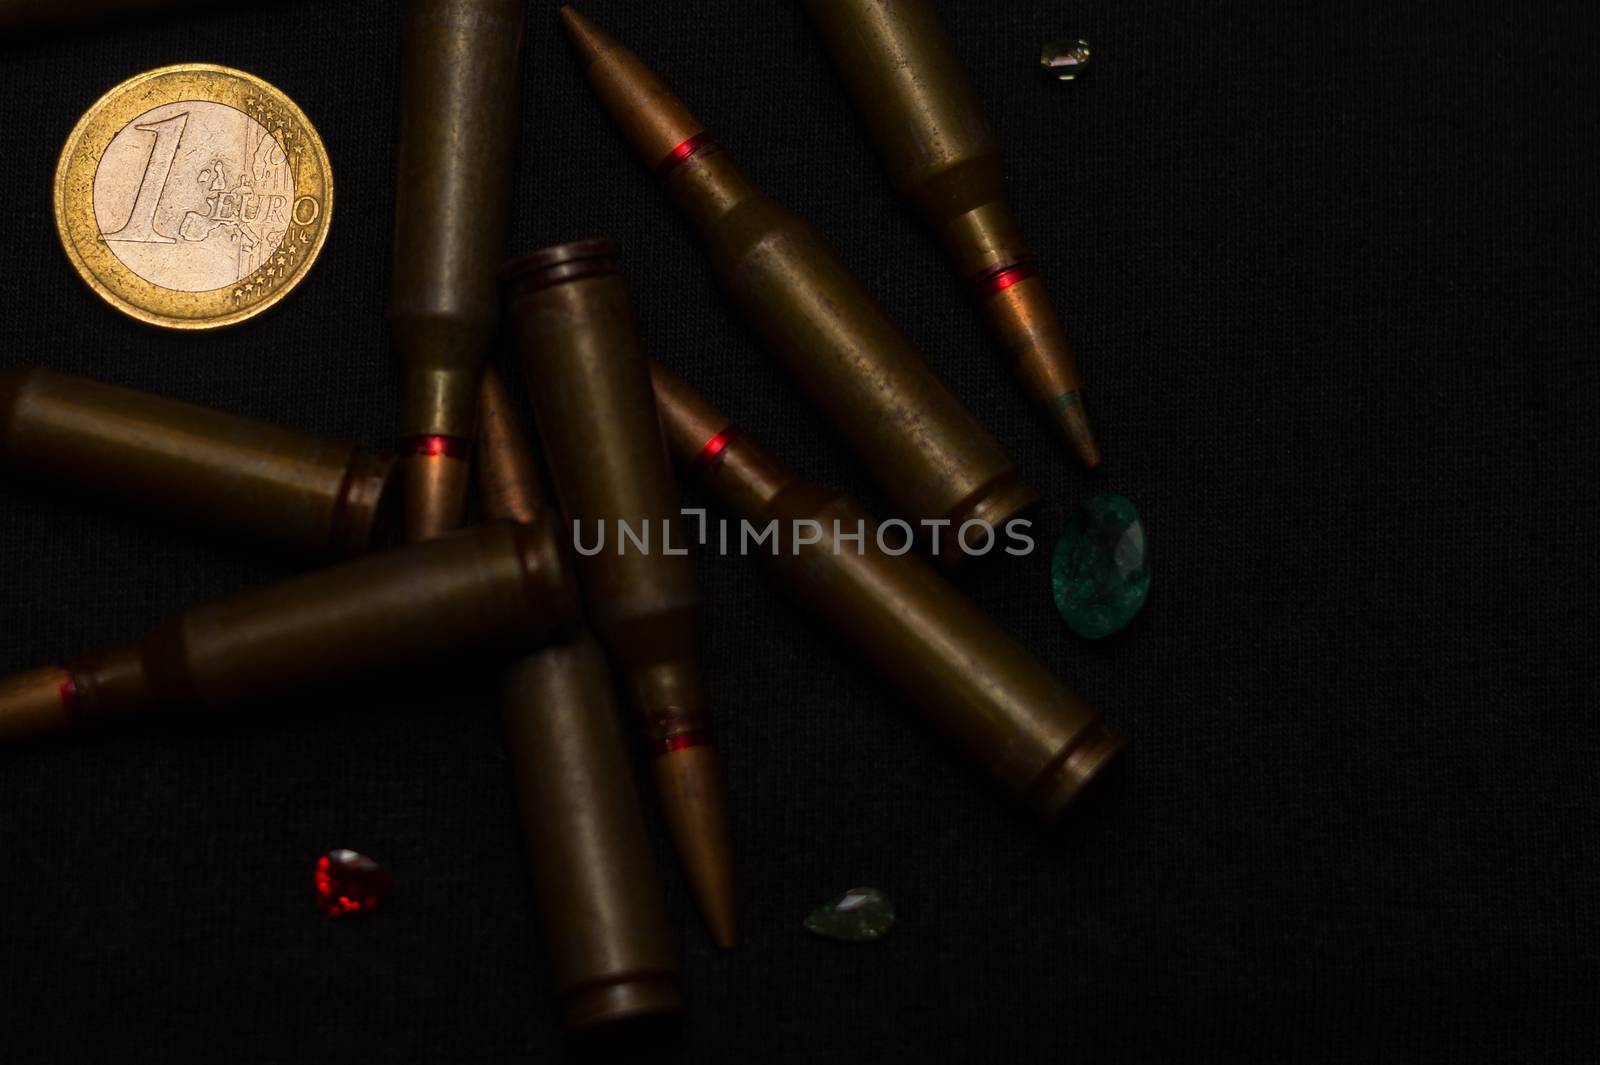 Rifle ammo around one euro coin wigh gemstones on black background. Symbolizes the war for money and one of the world's problems.